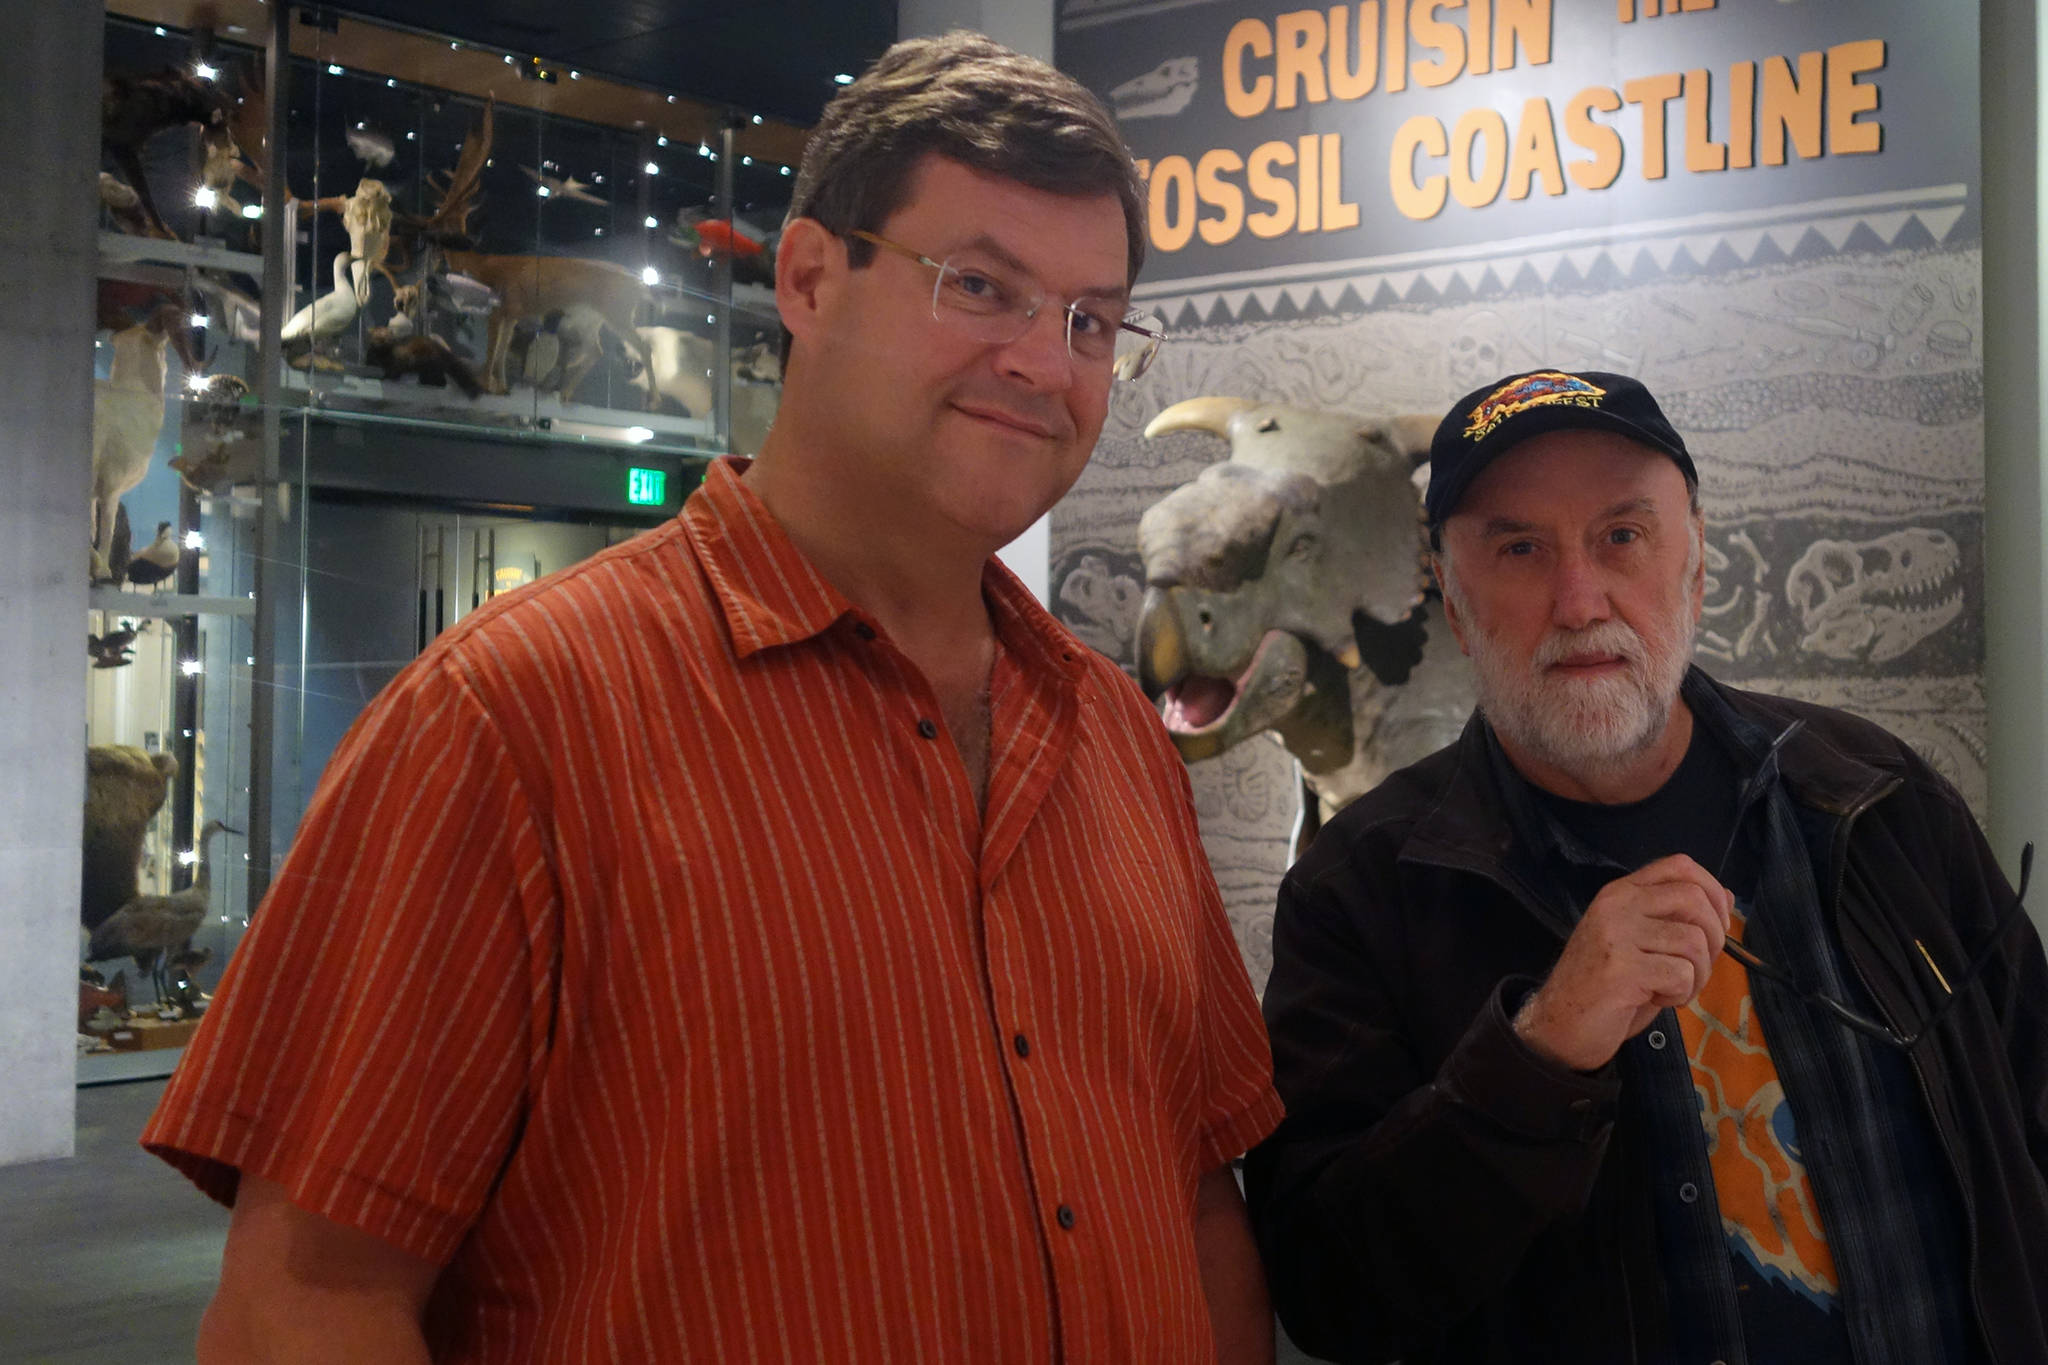 Smithsonian National Museum of Natural History Director Kirk Johnson and Ketchikan artist Ray Troll stand together in the Alaska State Museum. “Cruising’ the Fossil Coastline” is a traveling exhibition inspired by Troll and Johnson’s collaborative book. Johnson was in town Tuesday to talk at the museum. (Ben Hohenstatt | Capital City Weekly)